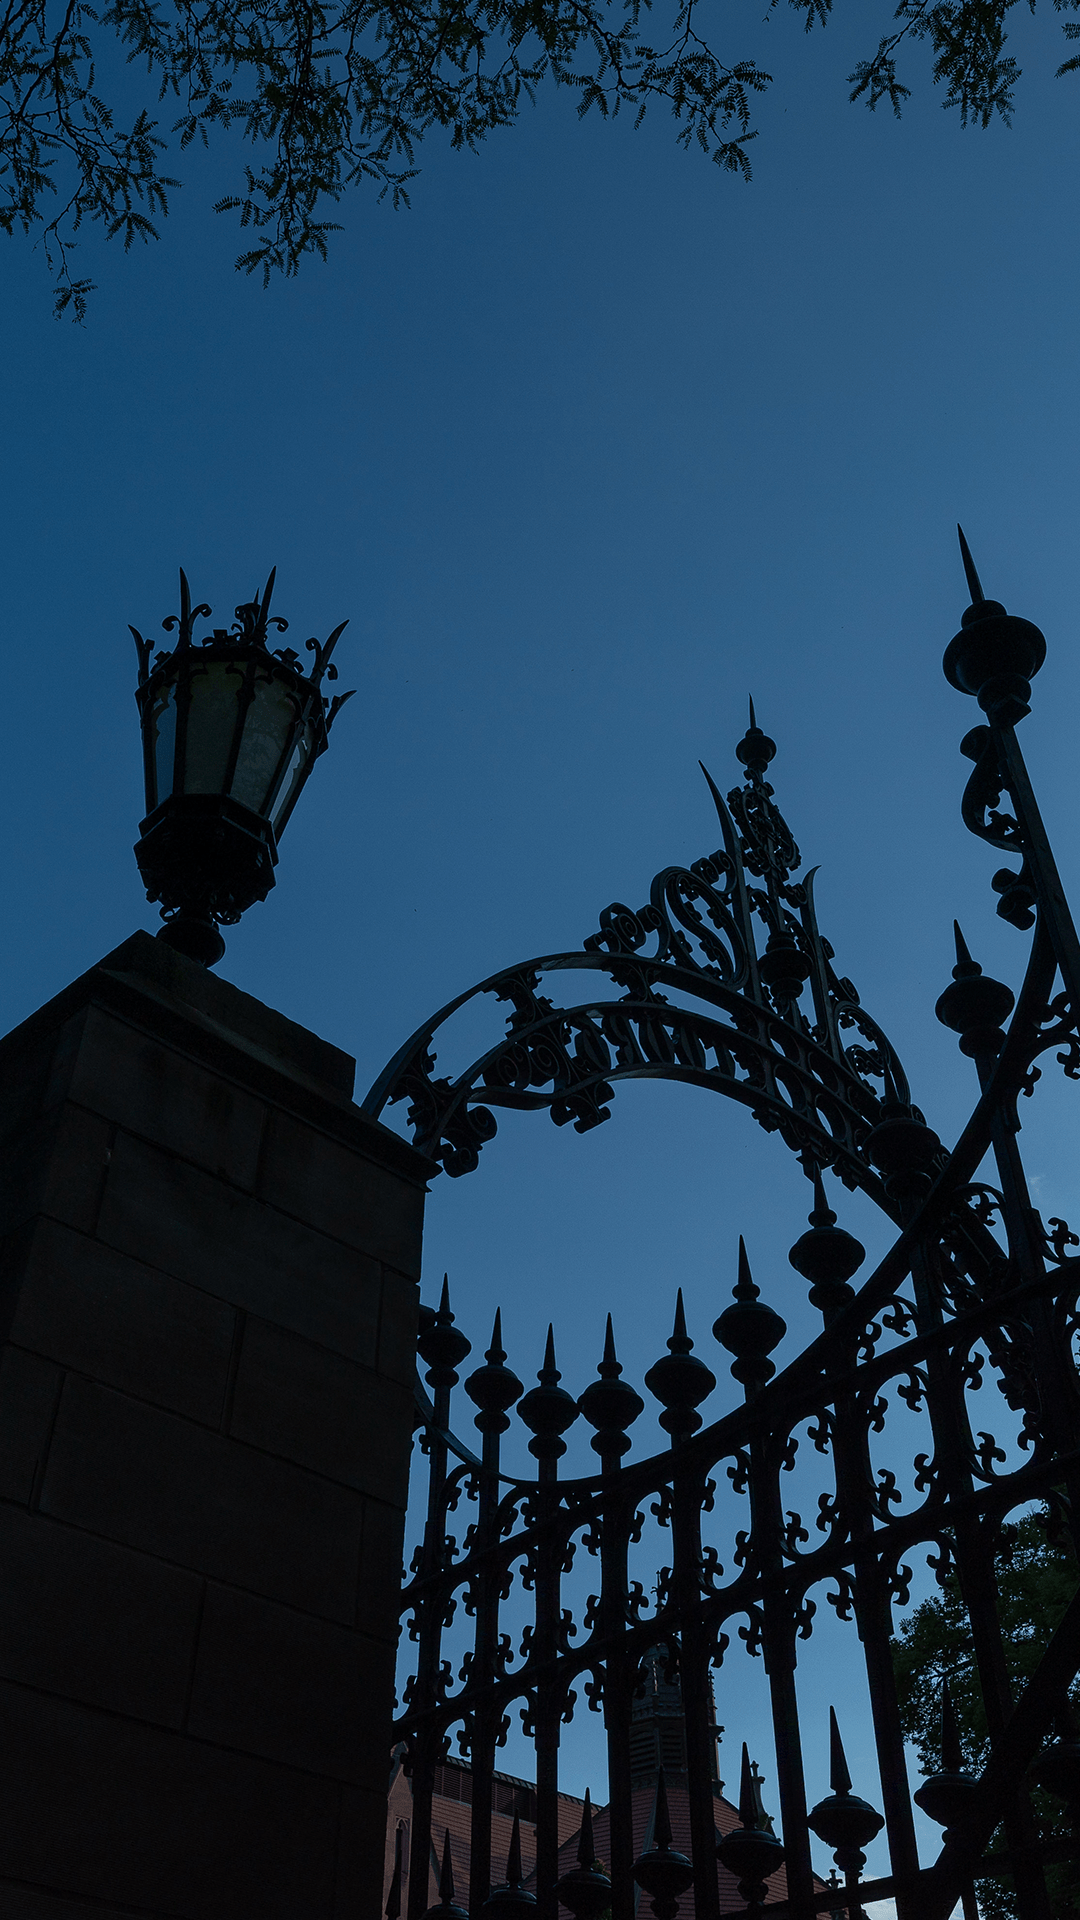 Black iron gate and lightpost silhouetted against a dark blue sky